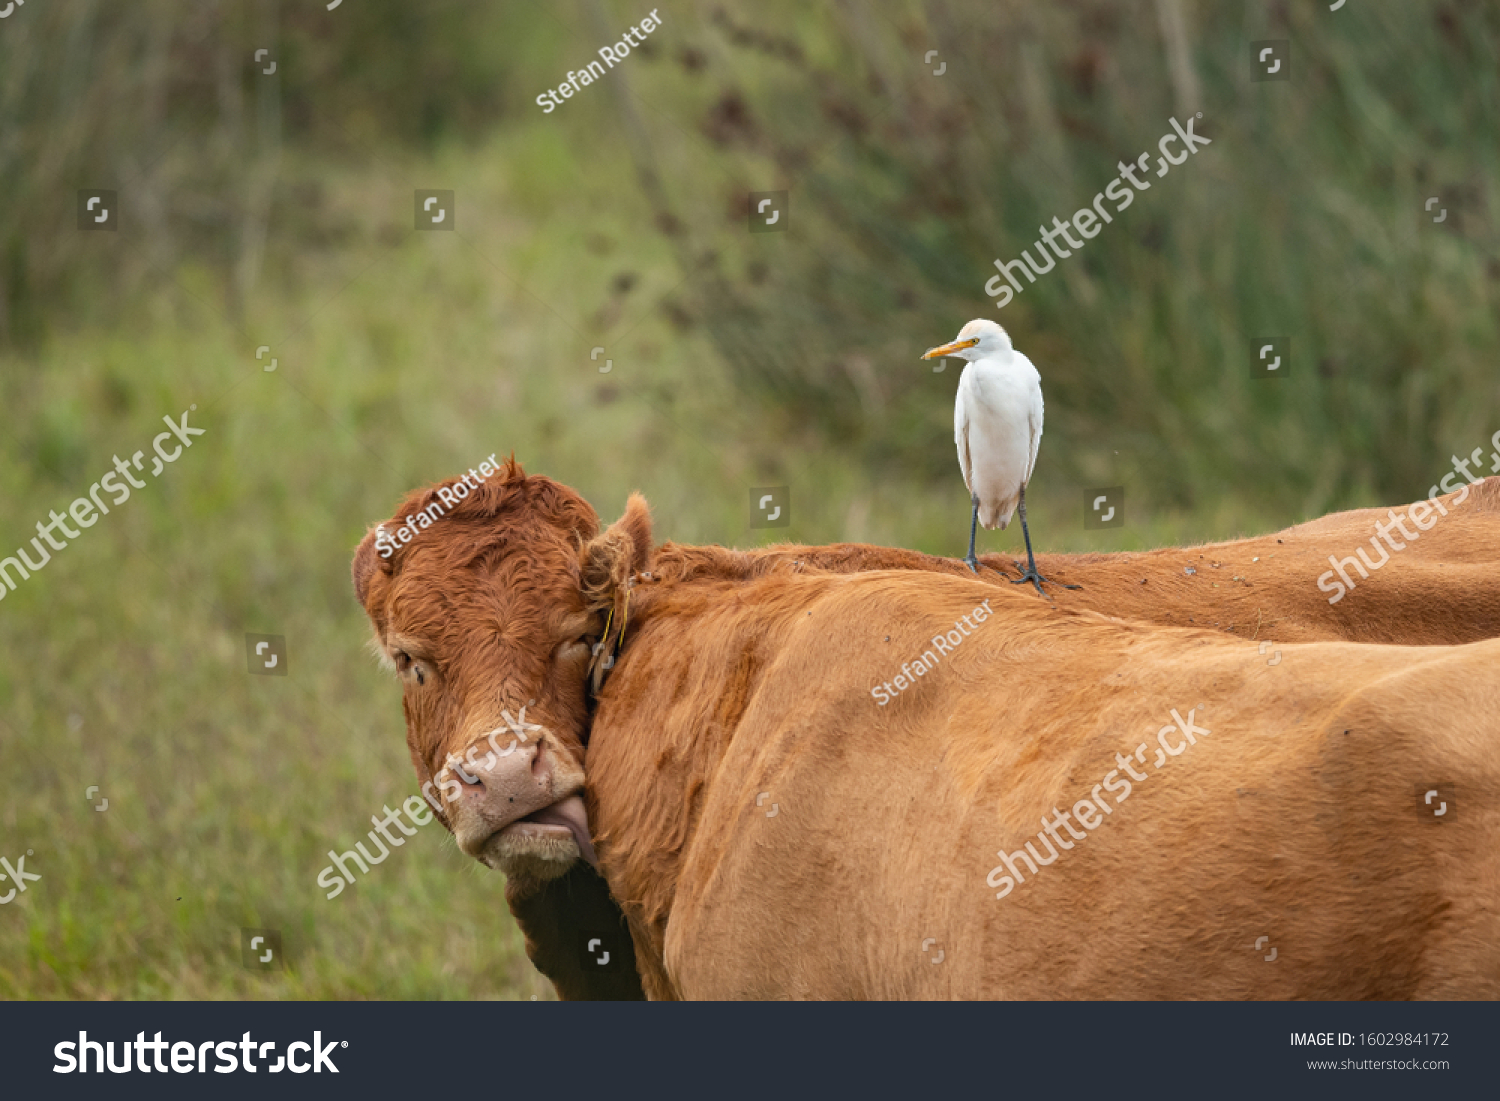 A Western Cattle Egret (Bubulcus ibis) standing on a brown cow (Grado, Italy) #1602984172